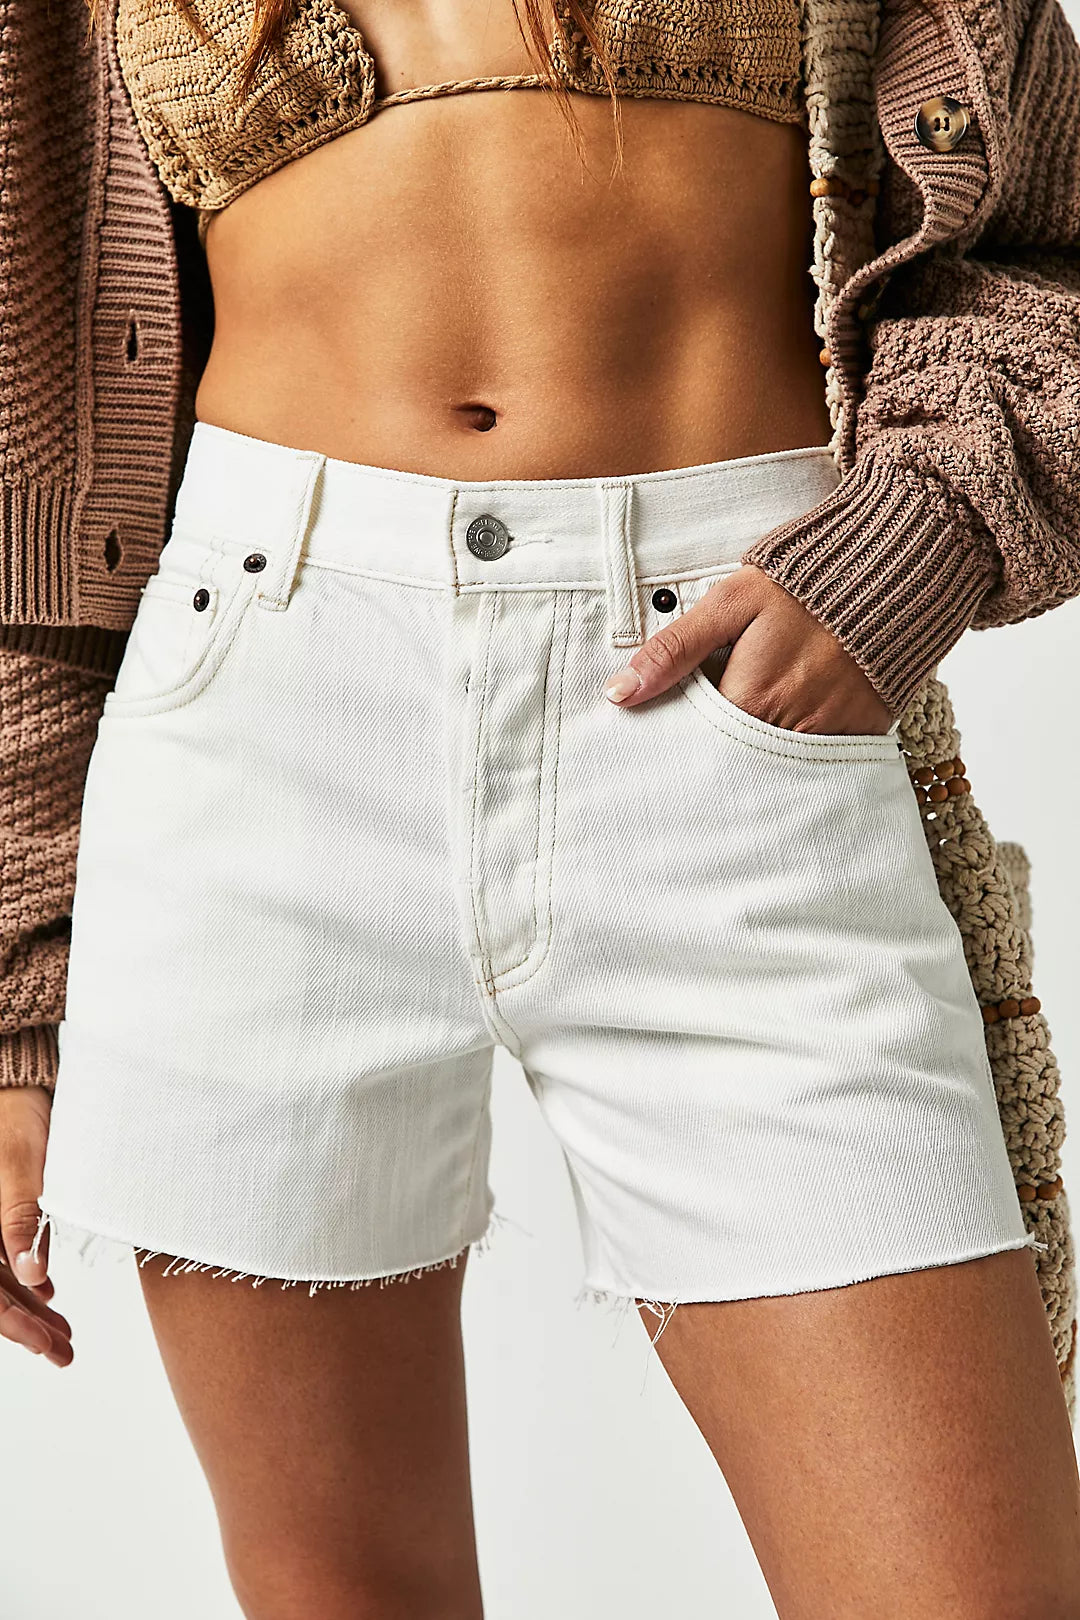 Free People Ivy Mid Rise Short